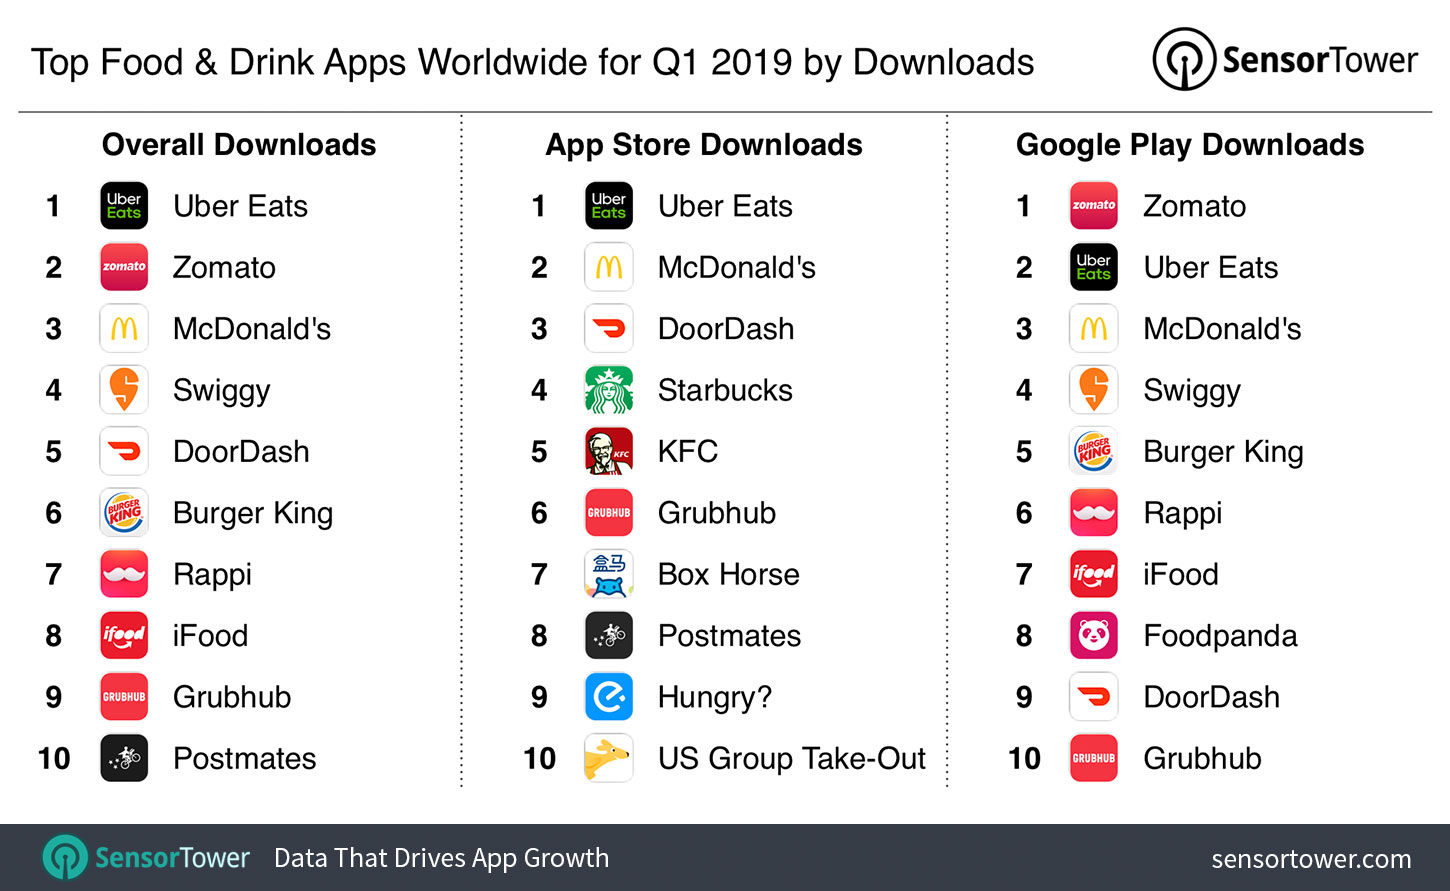 Top Food & Drink Apps Worldwide for Q1 2019 by Downloads